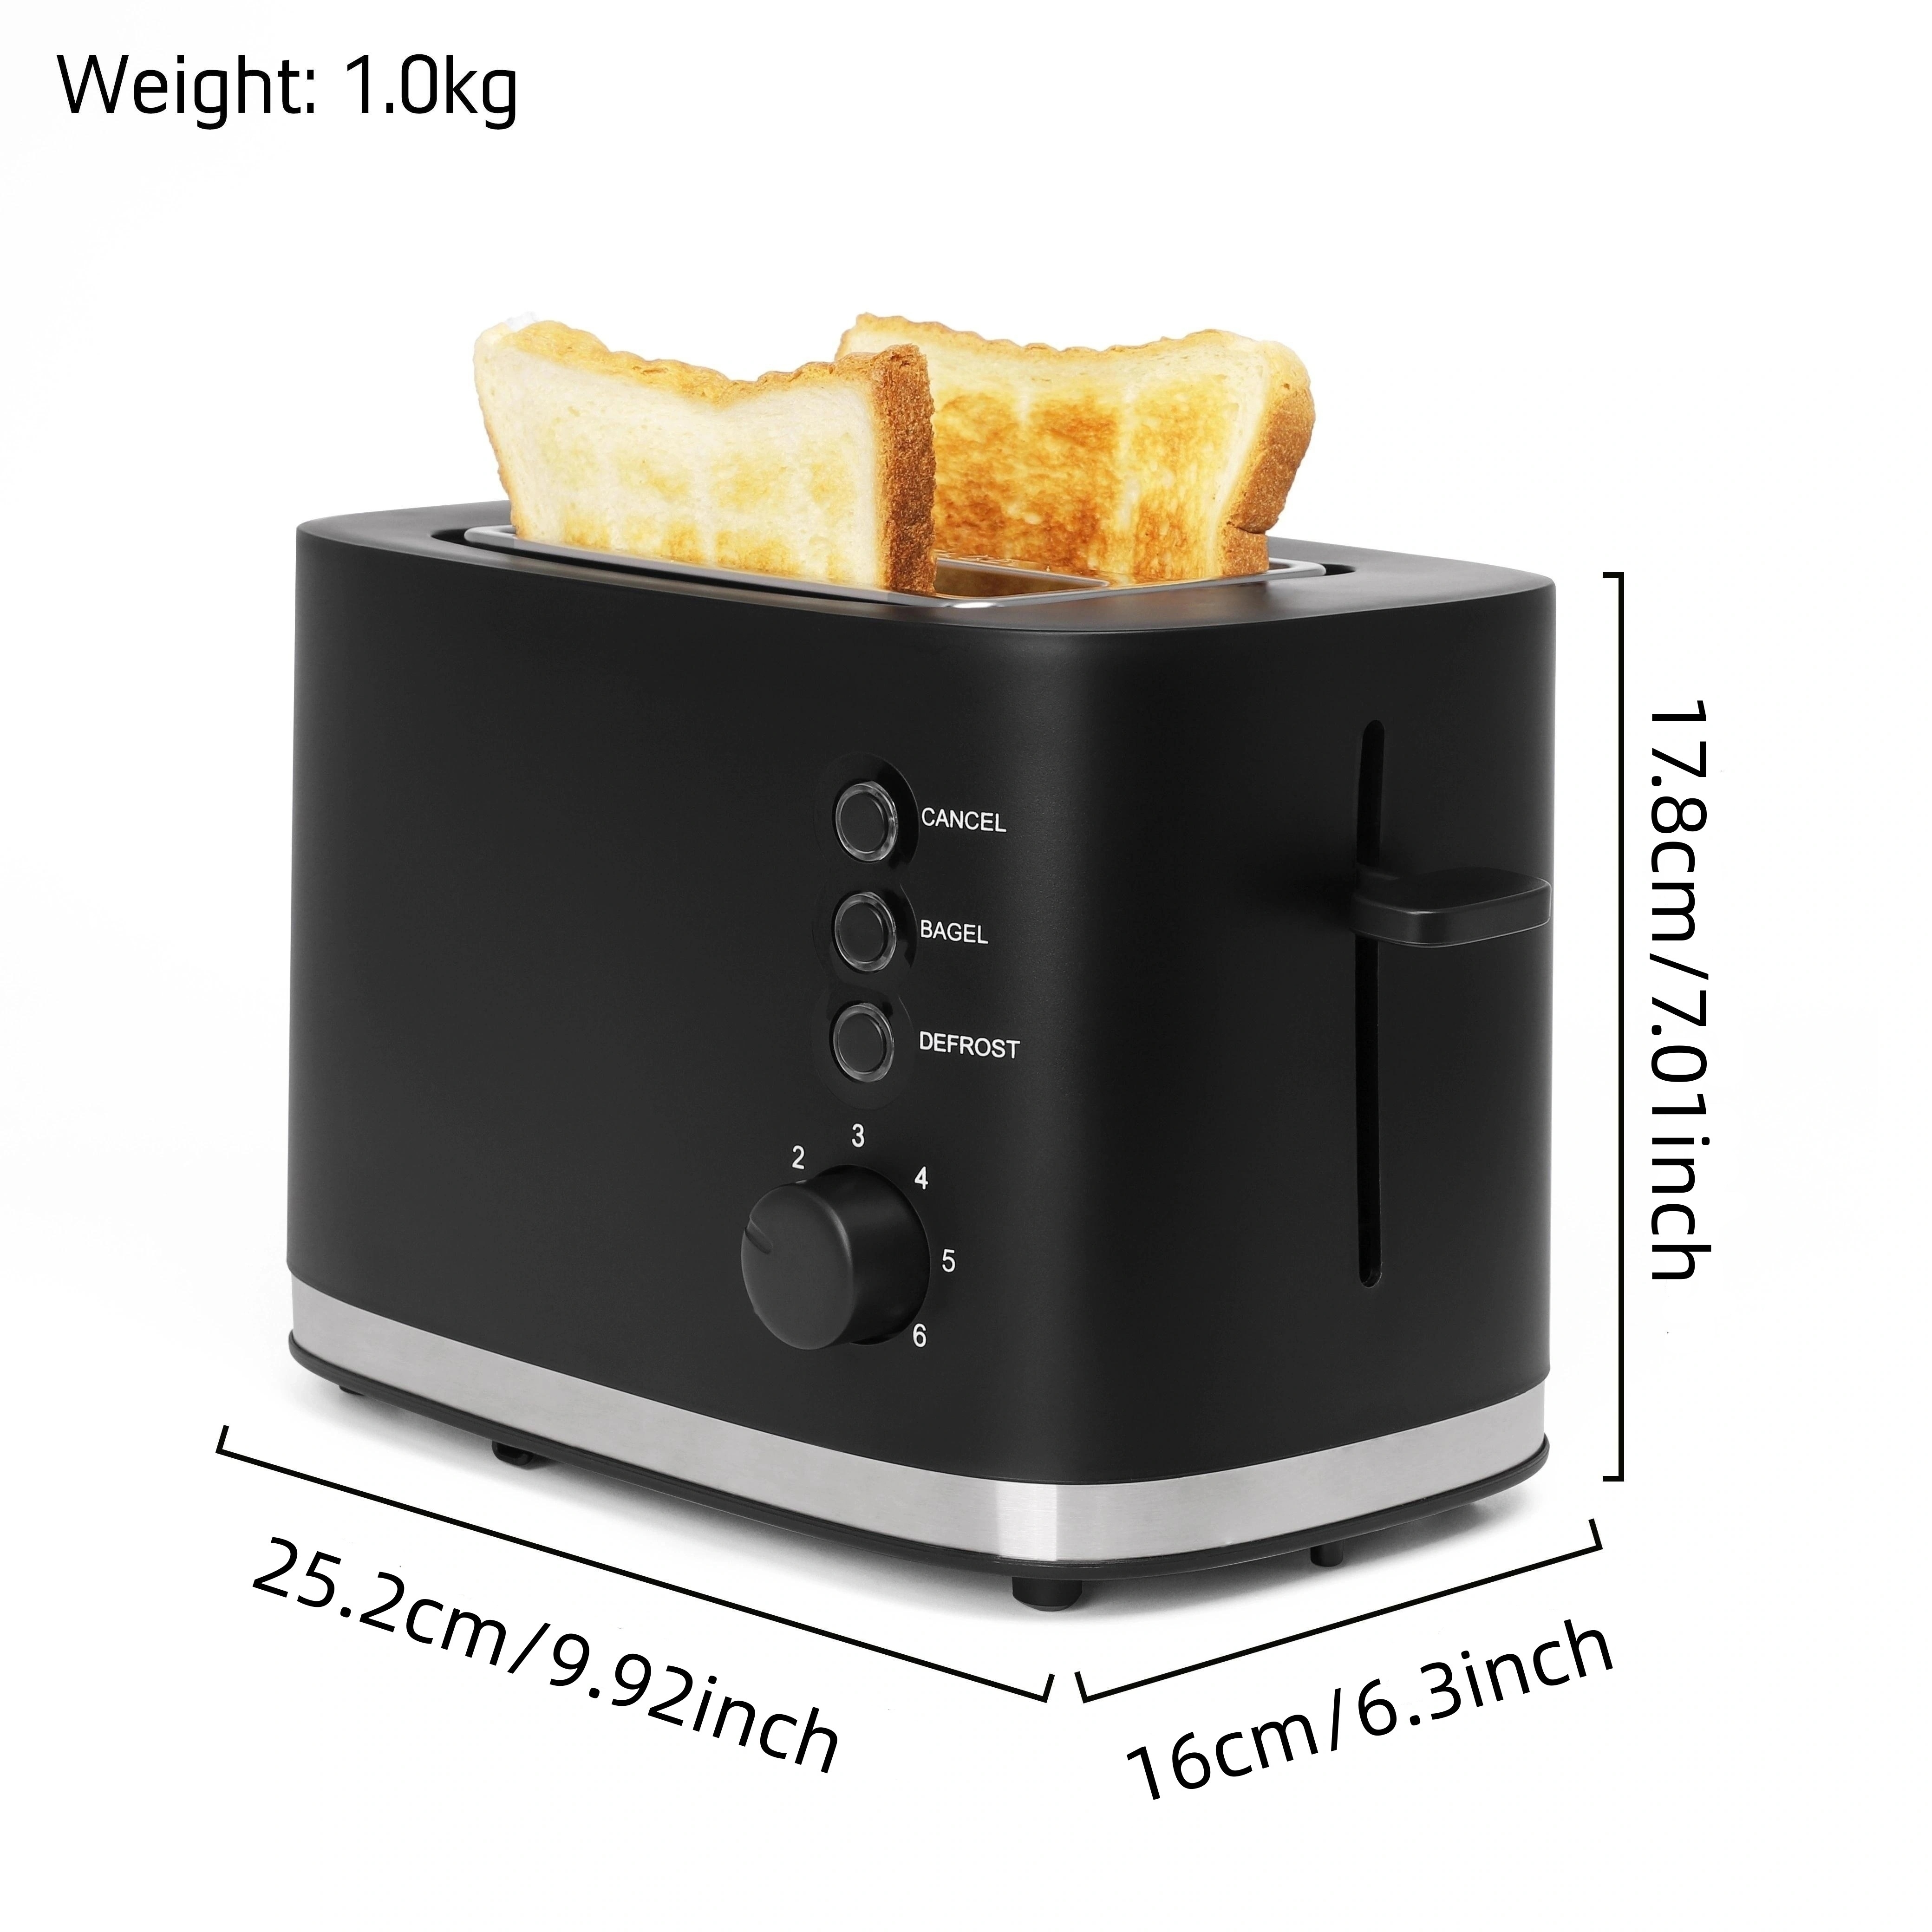 Vimukun Toaster 2 Slice, Extra Wide Slot, Stainless Steel, 7 Browning Shade  Settings, Bagel/Cancel/Gluten-Free/Reheat Function, Variable Browning